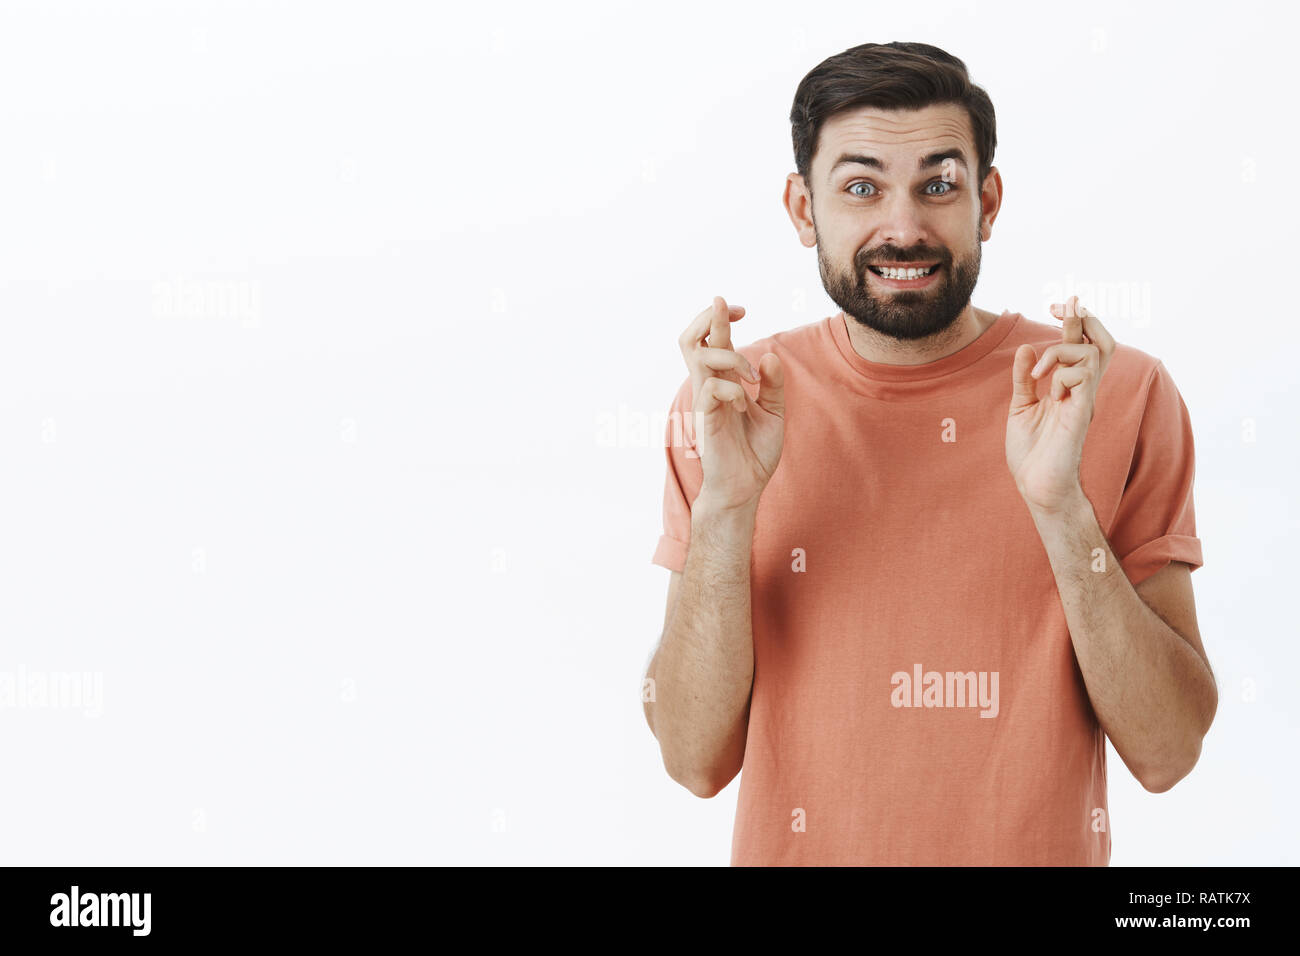 Studio shot of hopeful optimistic cute boyfriend with beard stooping and smiling with worry crossing fingers for good luck making wish for desired dream come true praying against white background Stock Photo